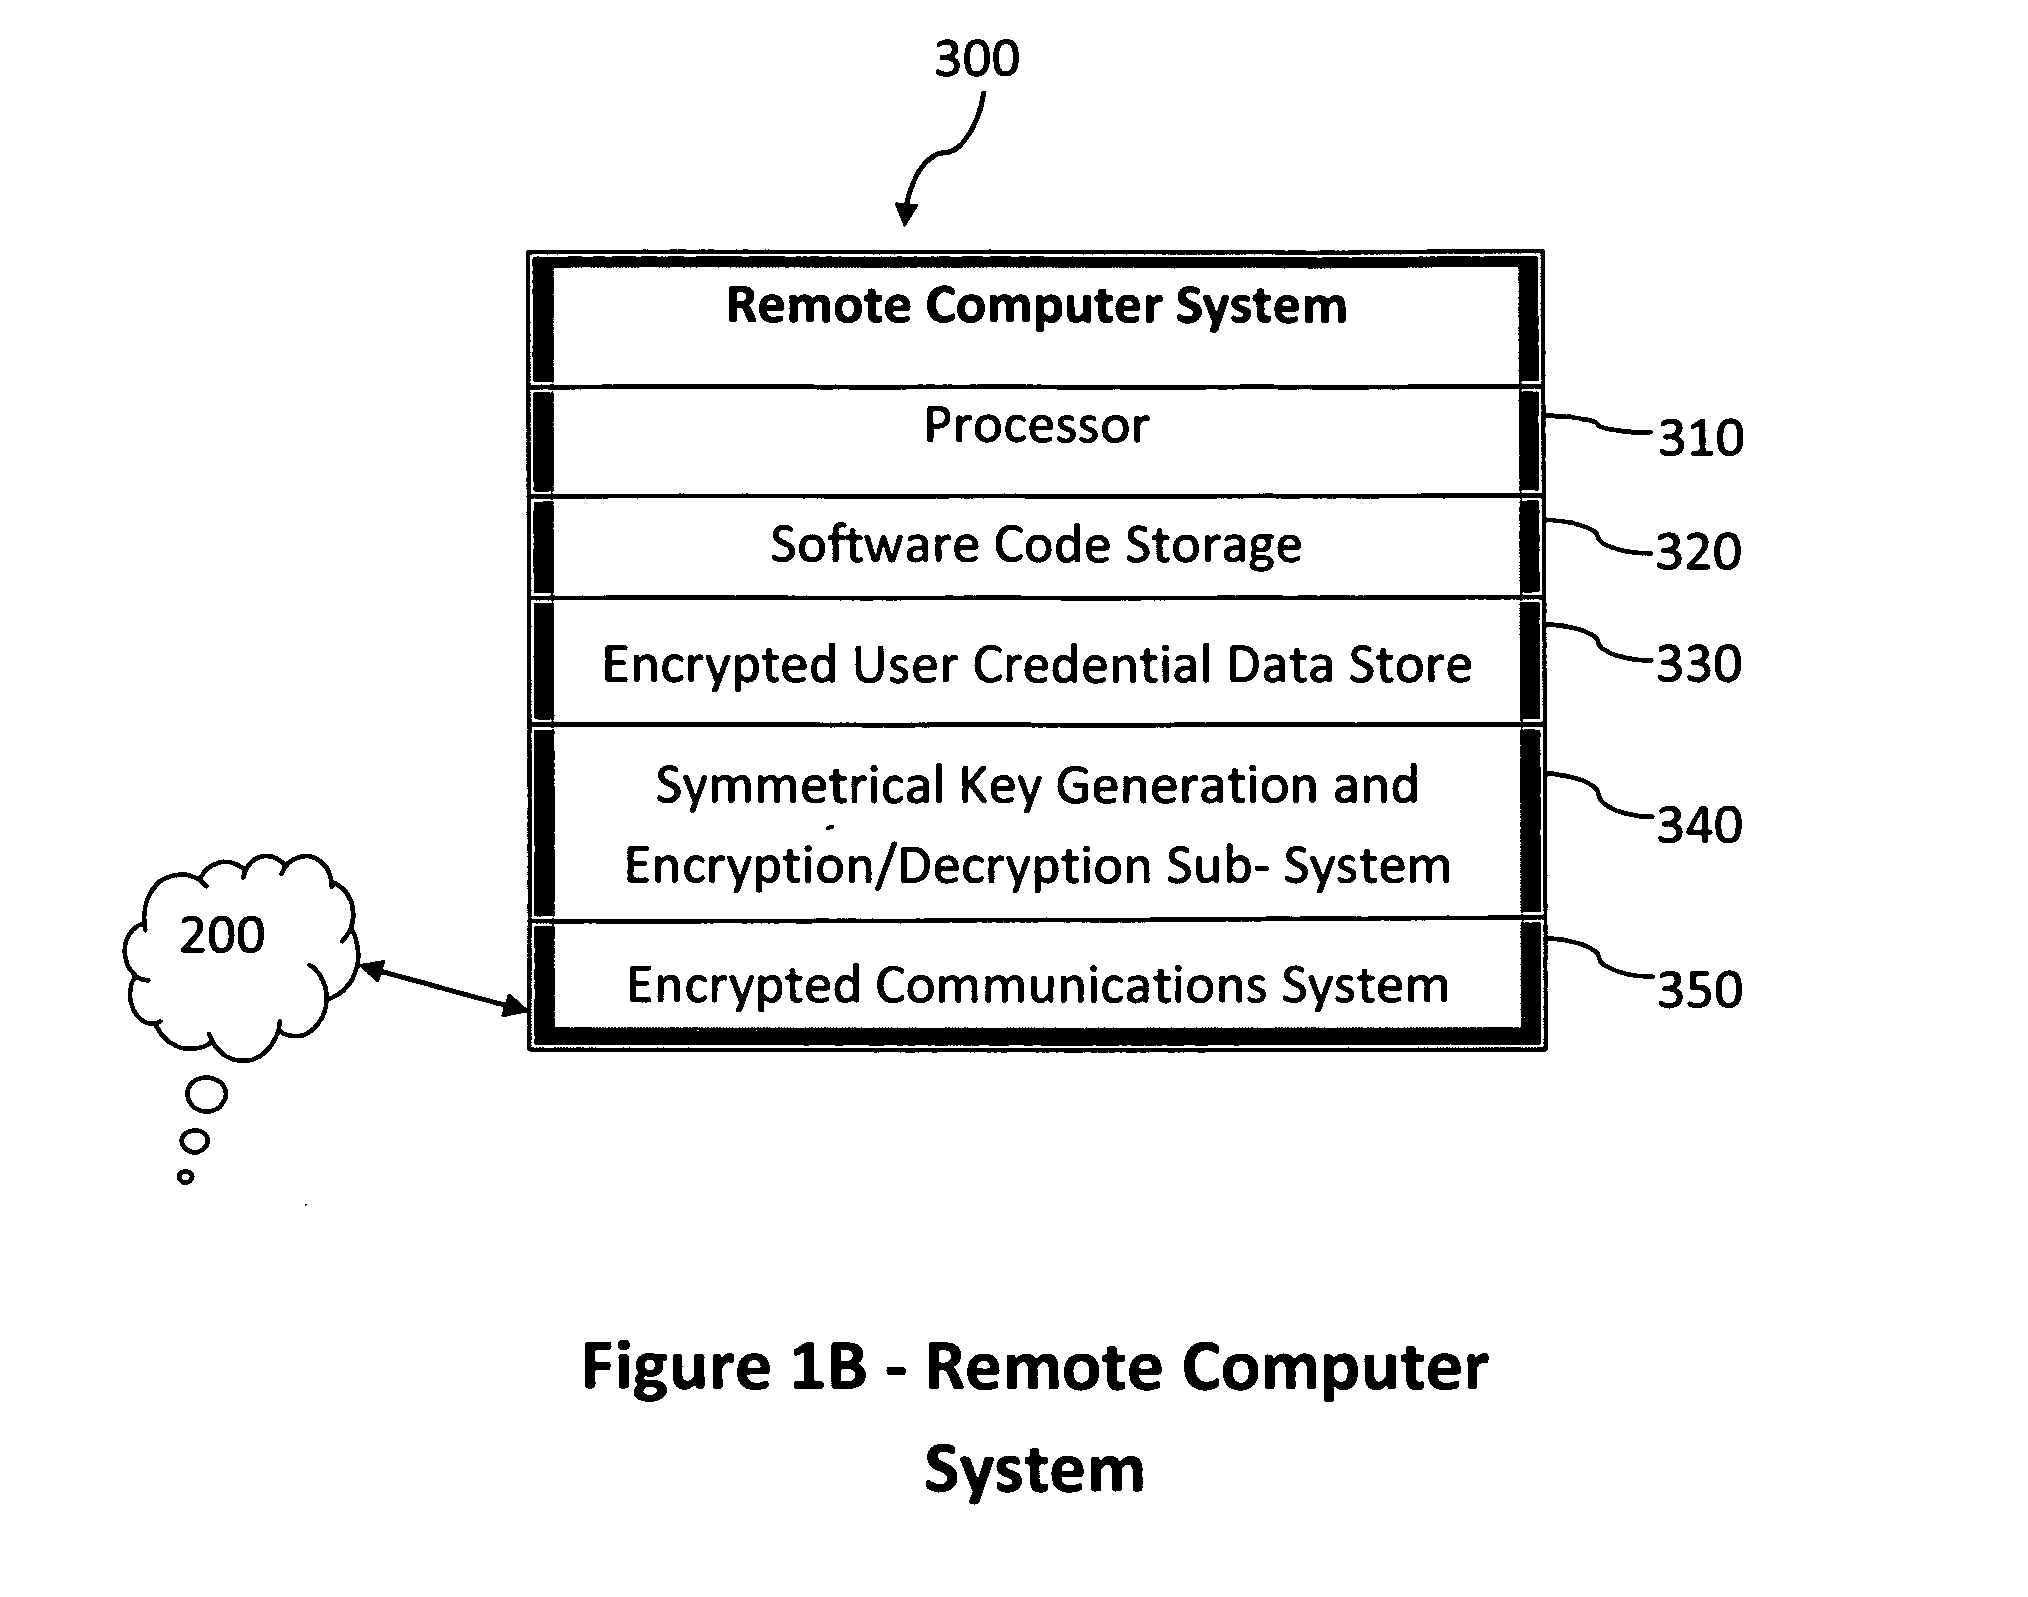 Method and system for combining a PIN and a biometric sample to provide template encryption and a trusted stand-alone computing device